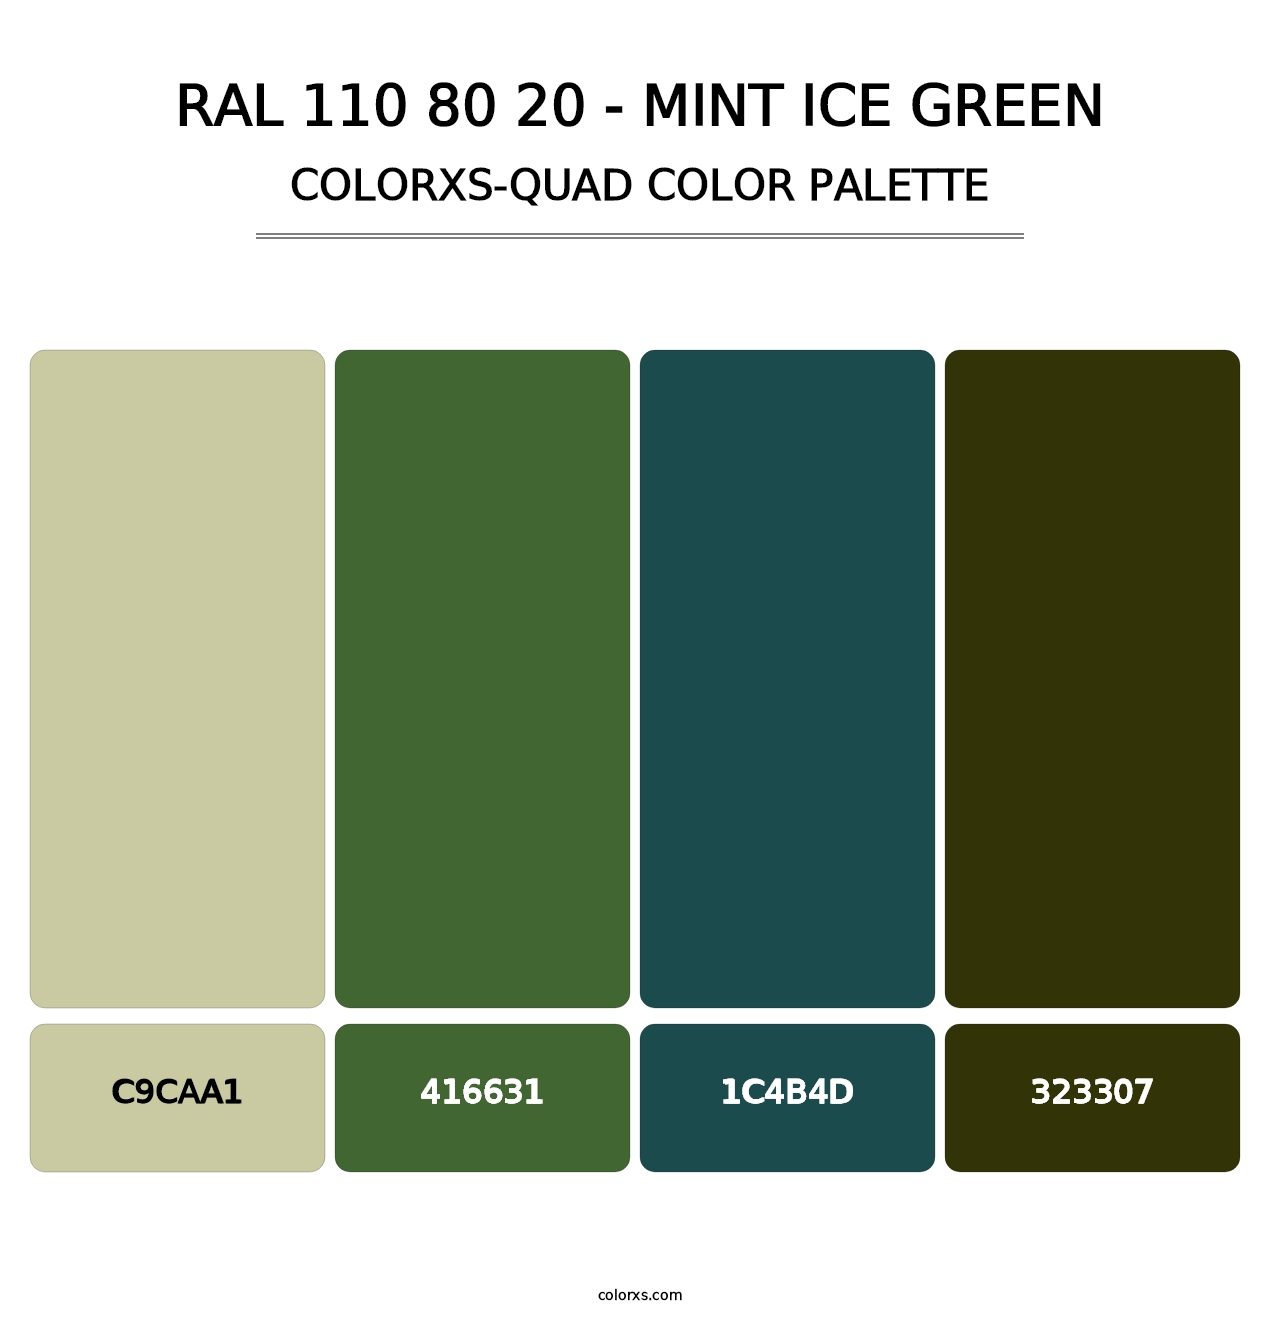 RAL 110 80 20 - Mint Ice Green - Colorxs Quad Palette